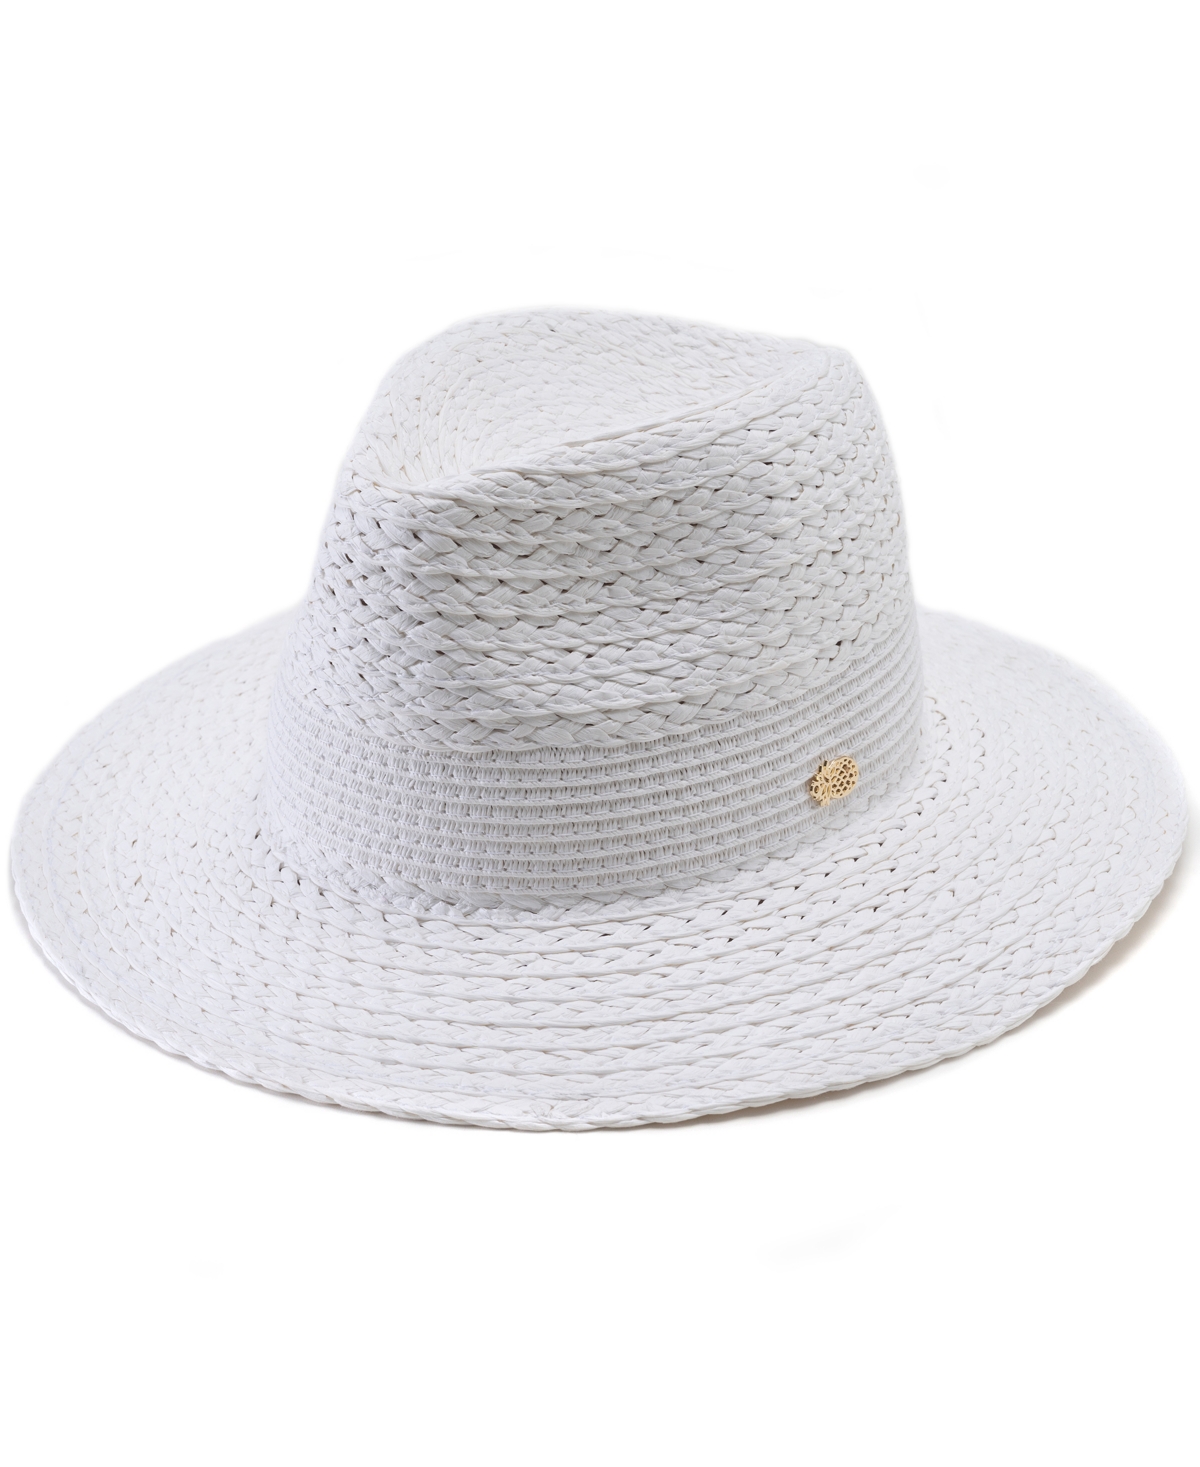 Straw Panama Hat with Icon Detail - White